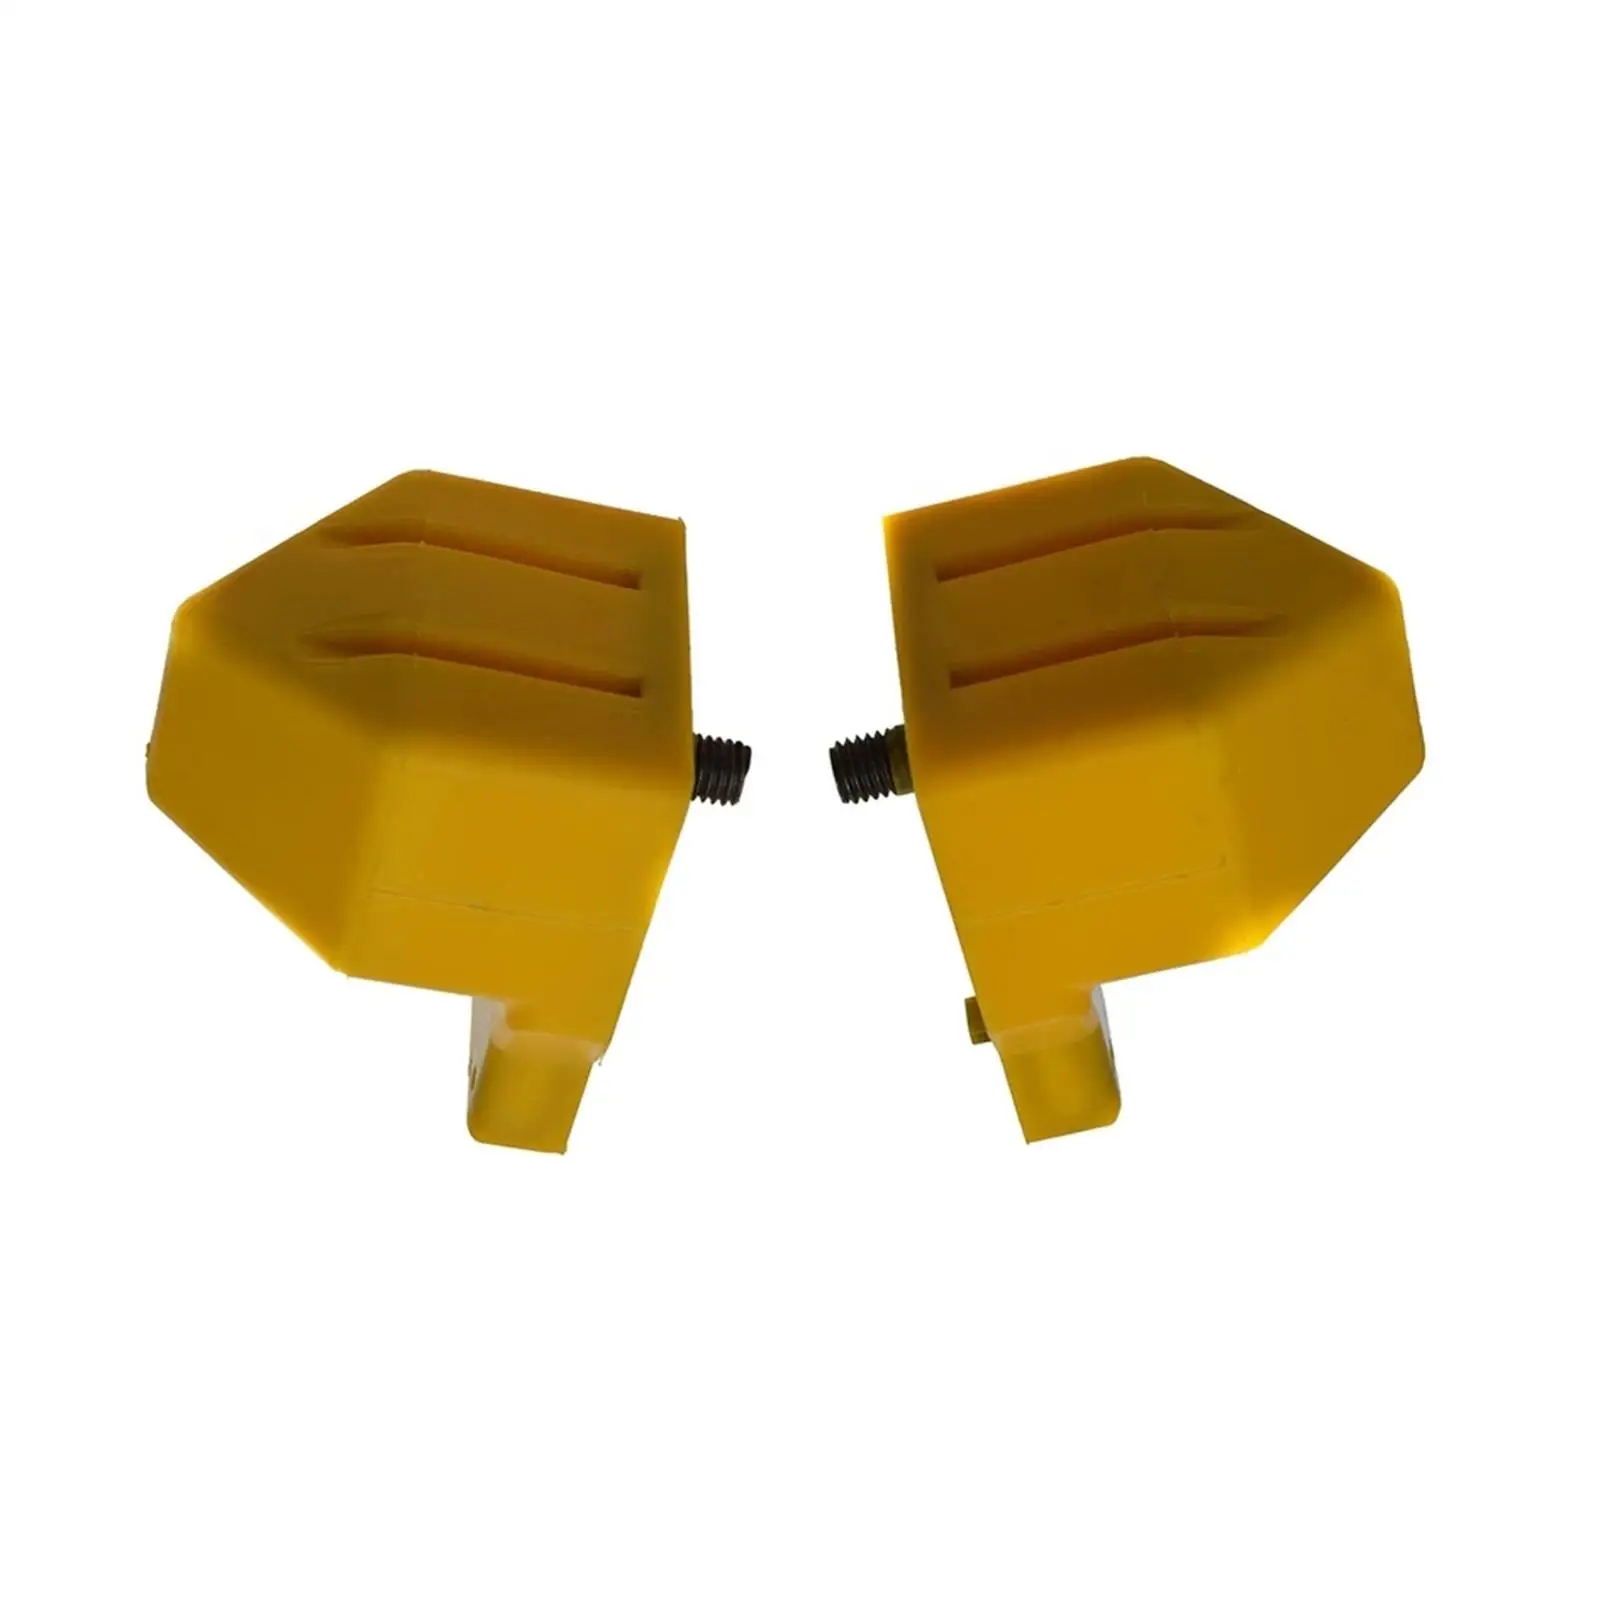 2Pcs Front bumpers stopper Assembly for 2500 Pickup Truck SUV